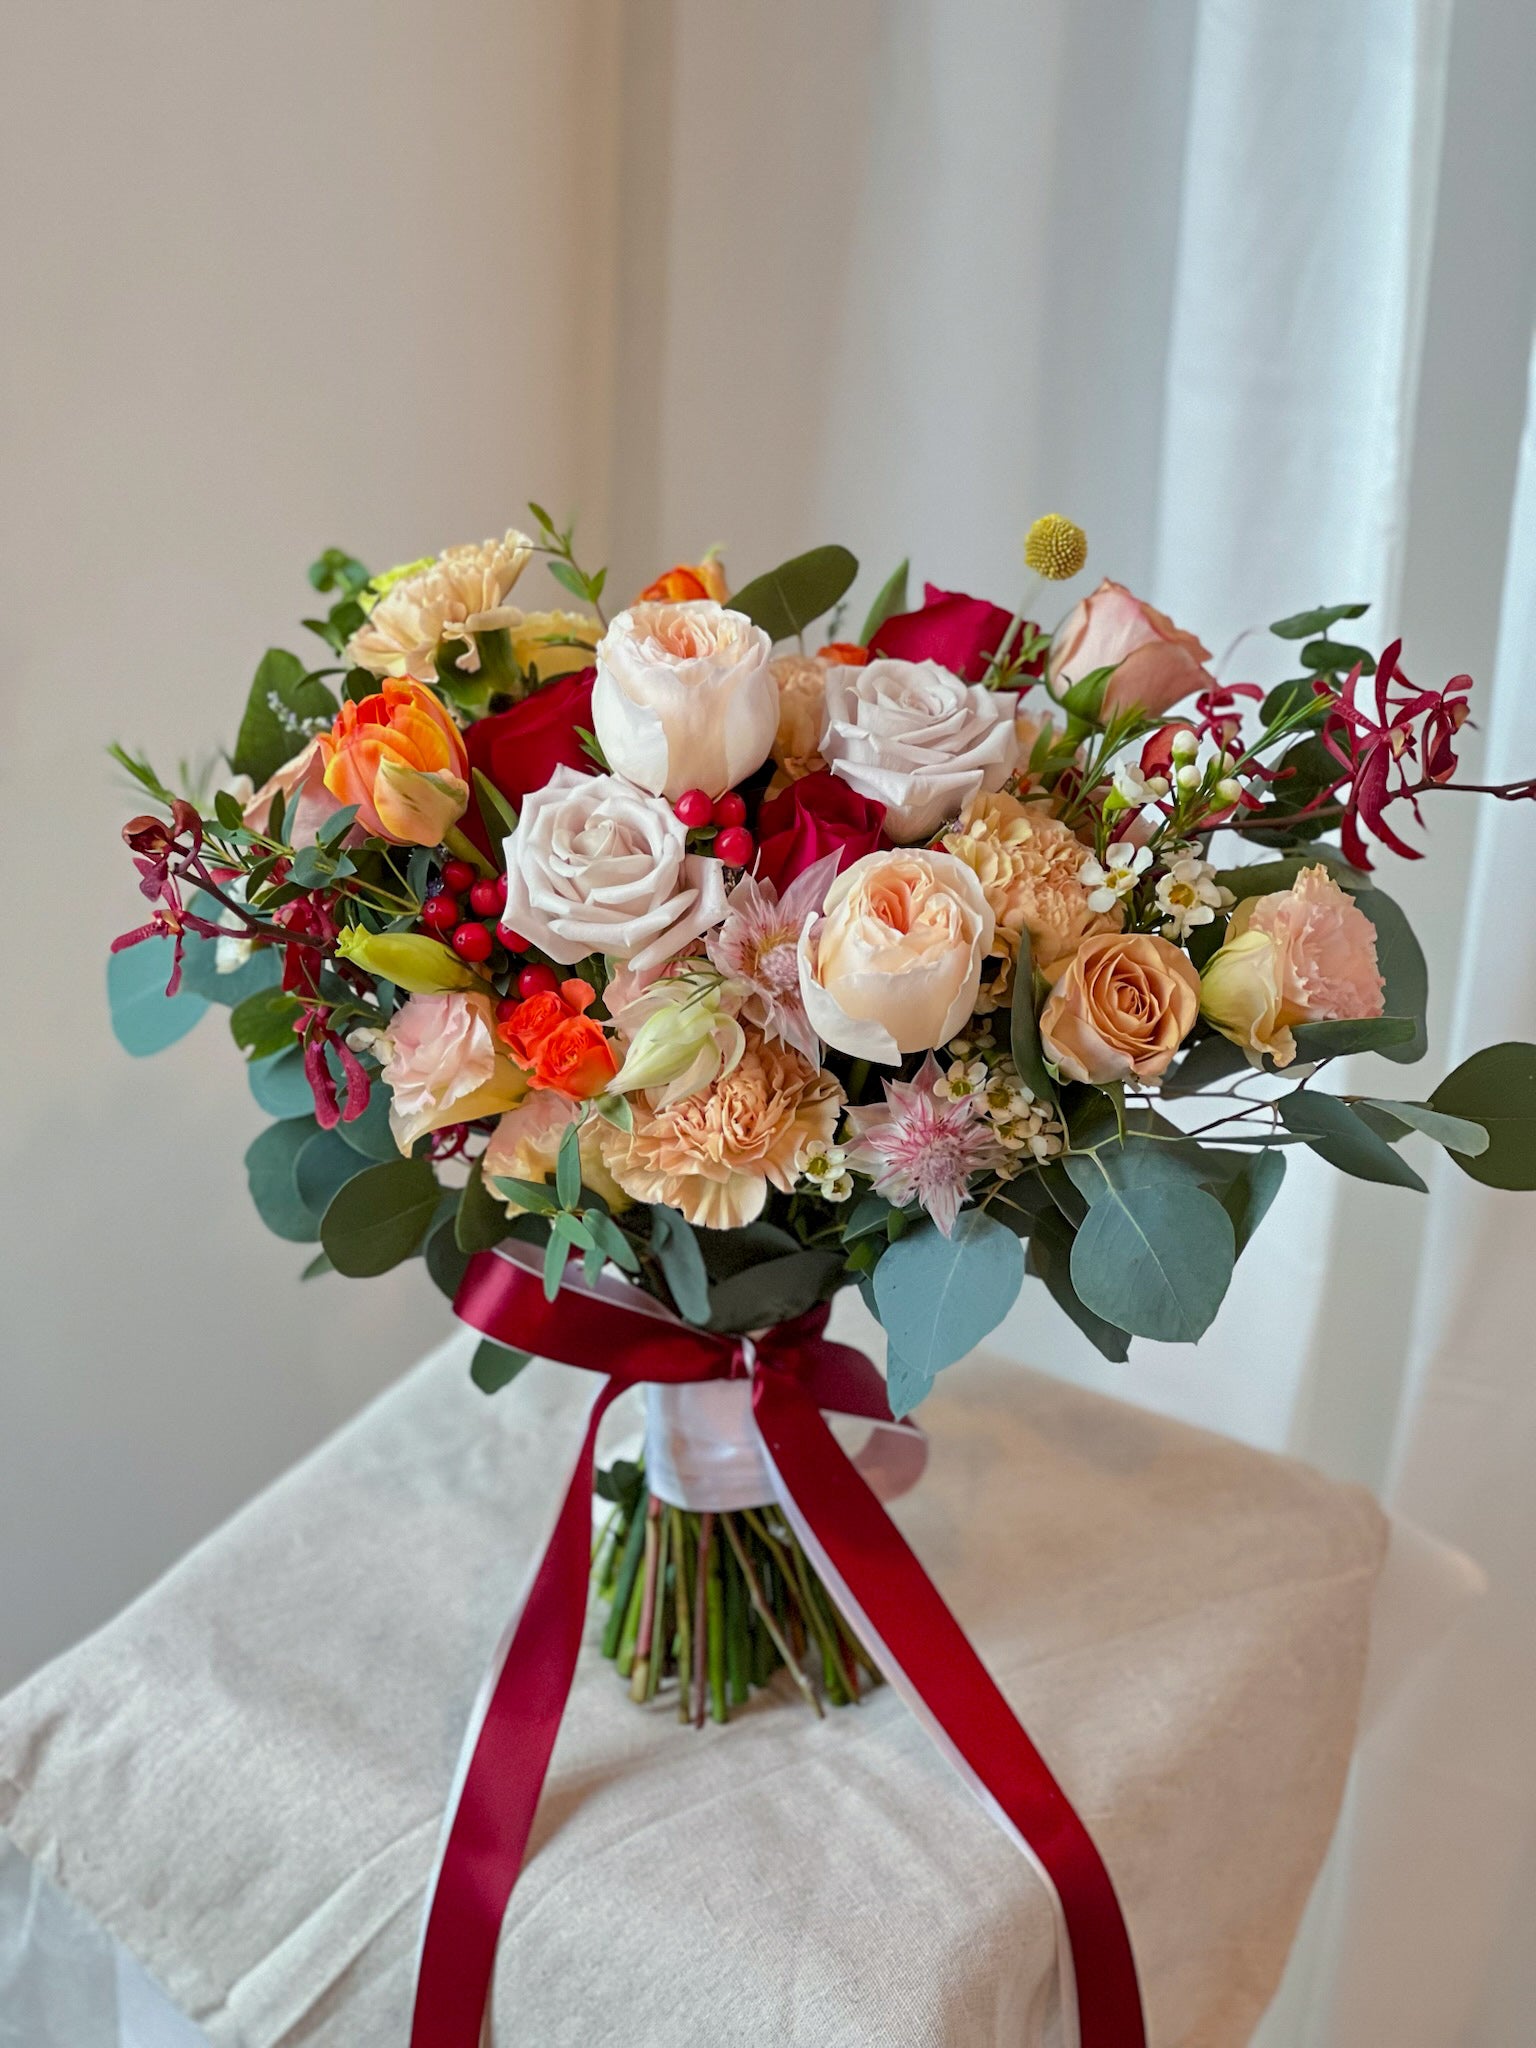 [4 days advanced order] Juliet Roses in Red Orange Peach Theme - Fresh Bridal-Style Bouquet